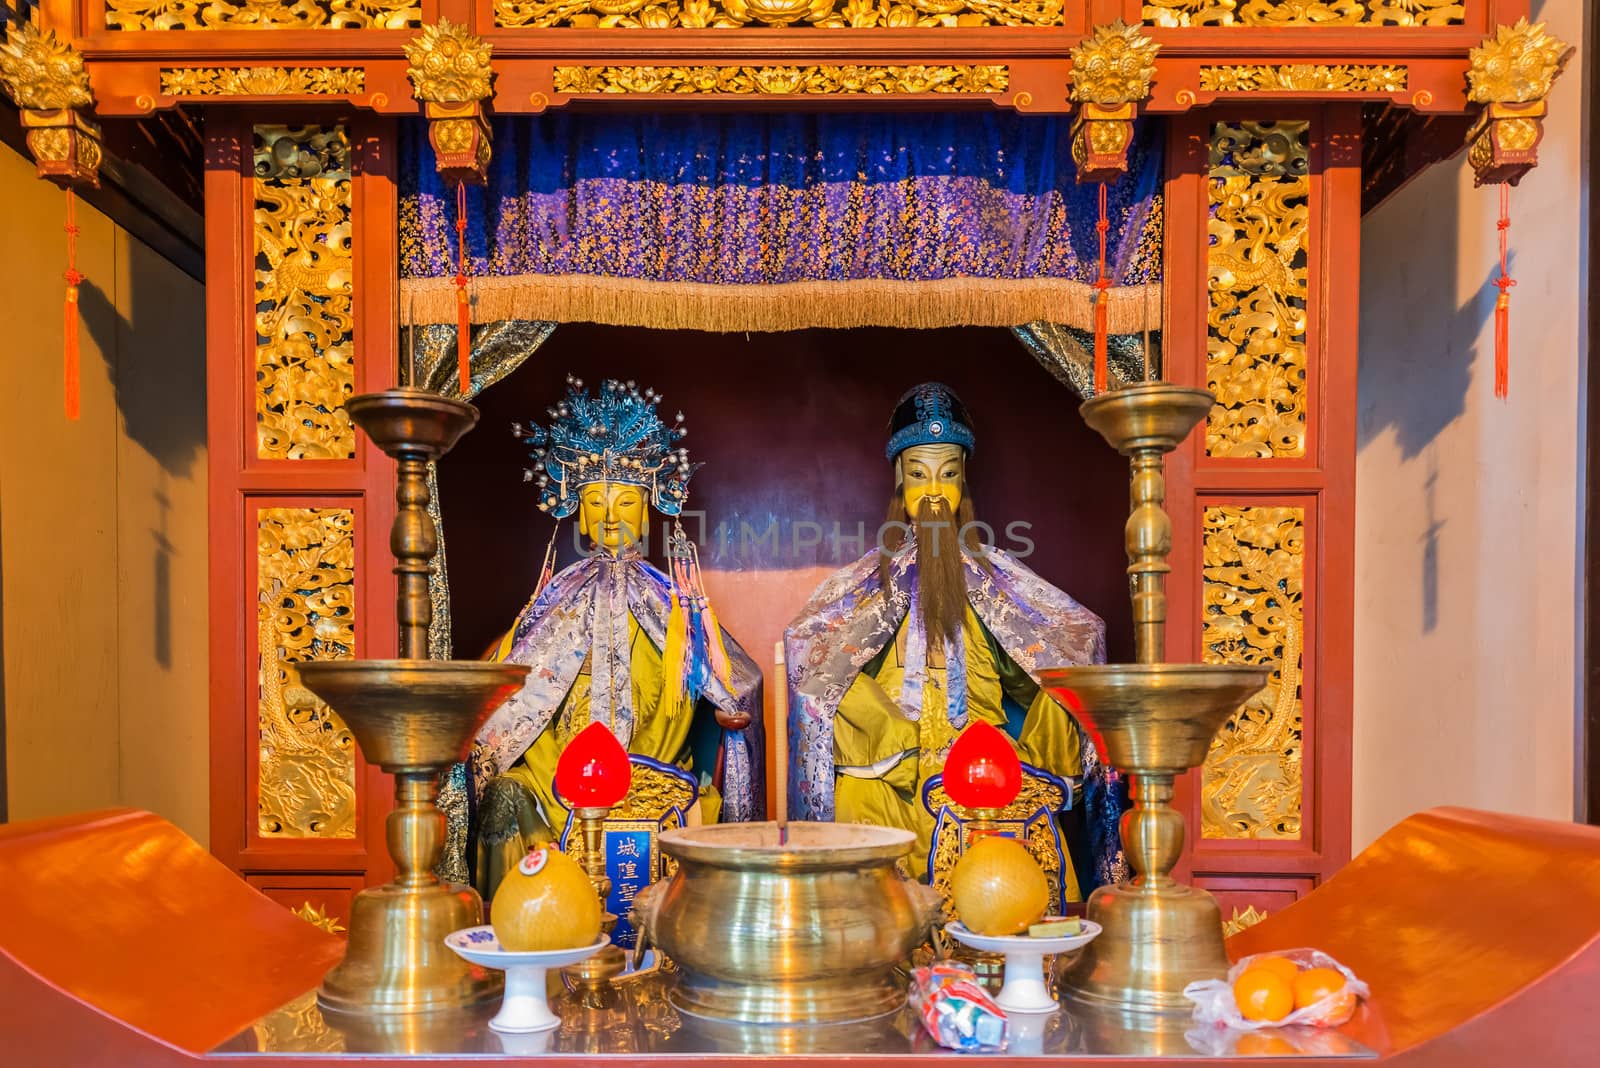 Shanghai, China - April 7, 2013: statues in the city god temple Chenghuang Miao  at the city of Shanghai in China on april 7th, 2013